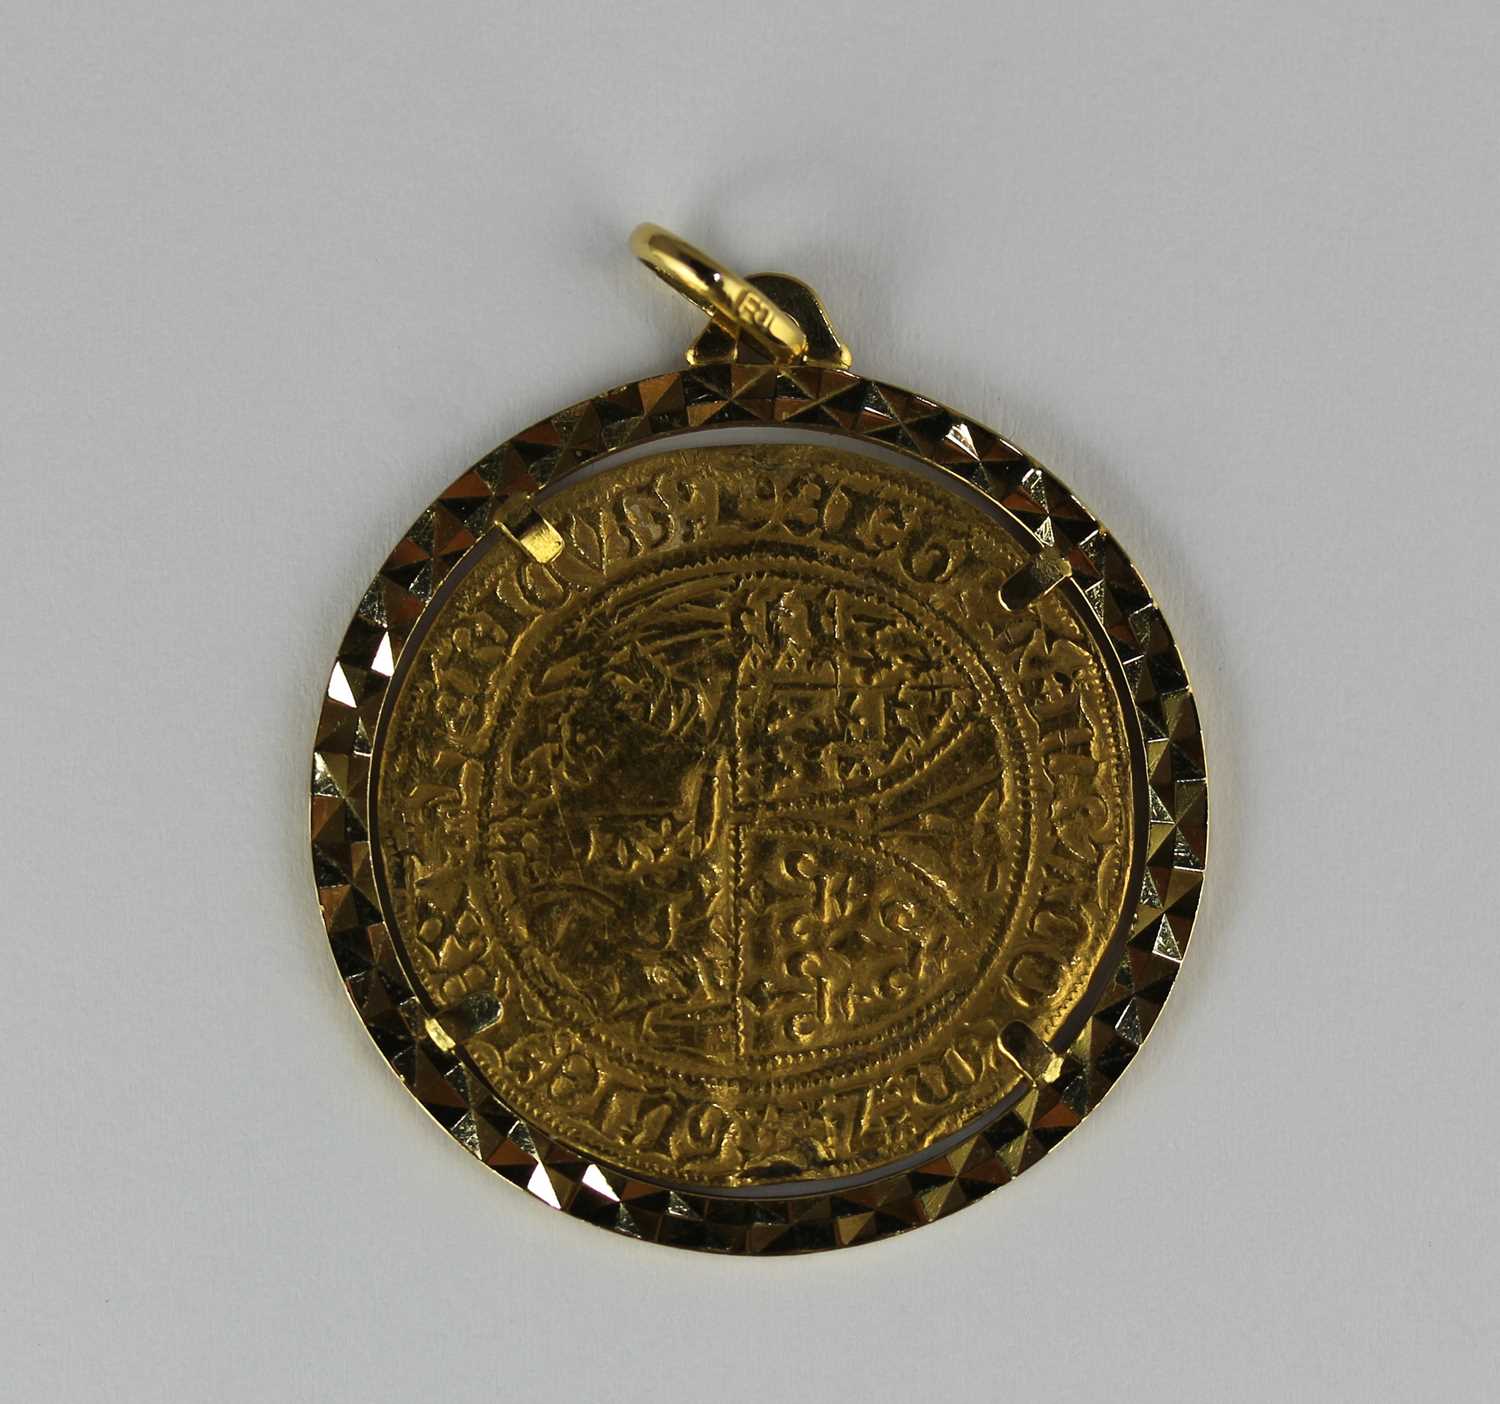 A French gold coin; Henry VI Salut d'or Amiens Mint, mint mark Paschal lamb, mounted as a pendant